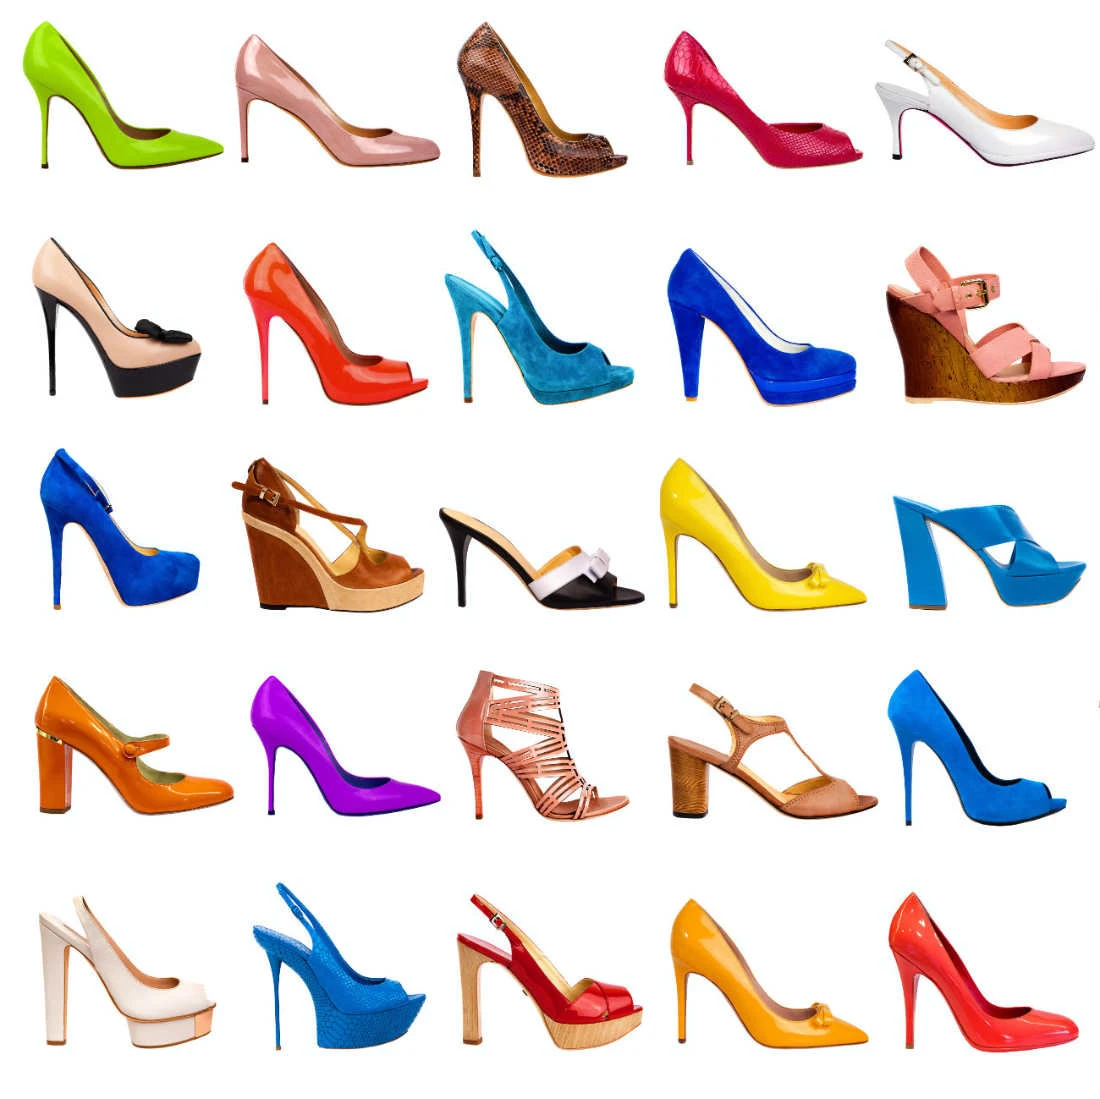 DIfferent types of heels in different colors on a white background.